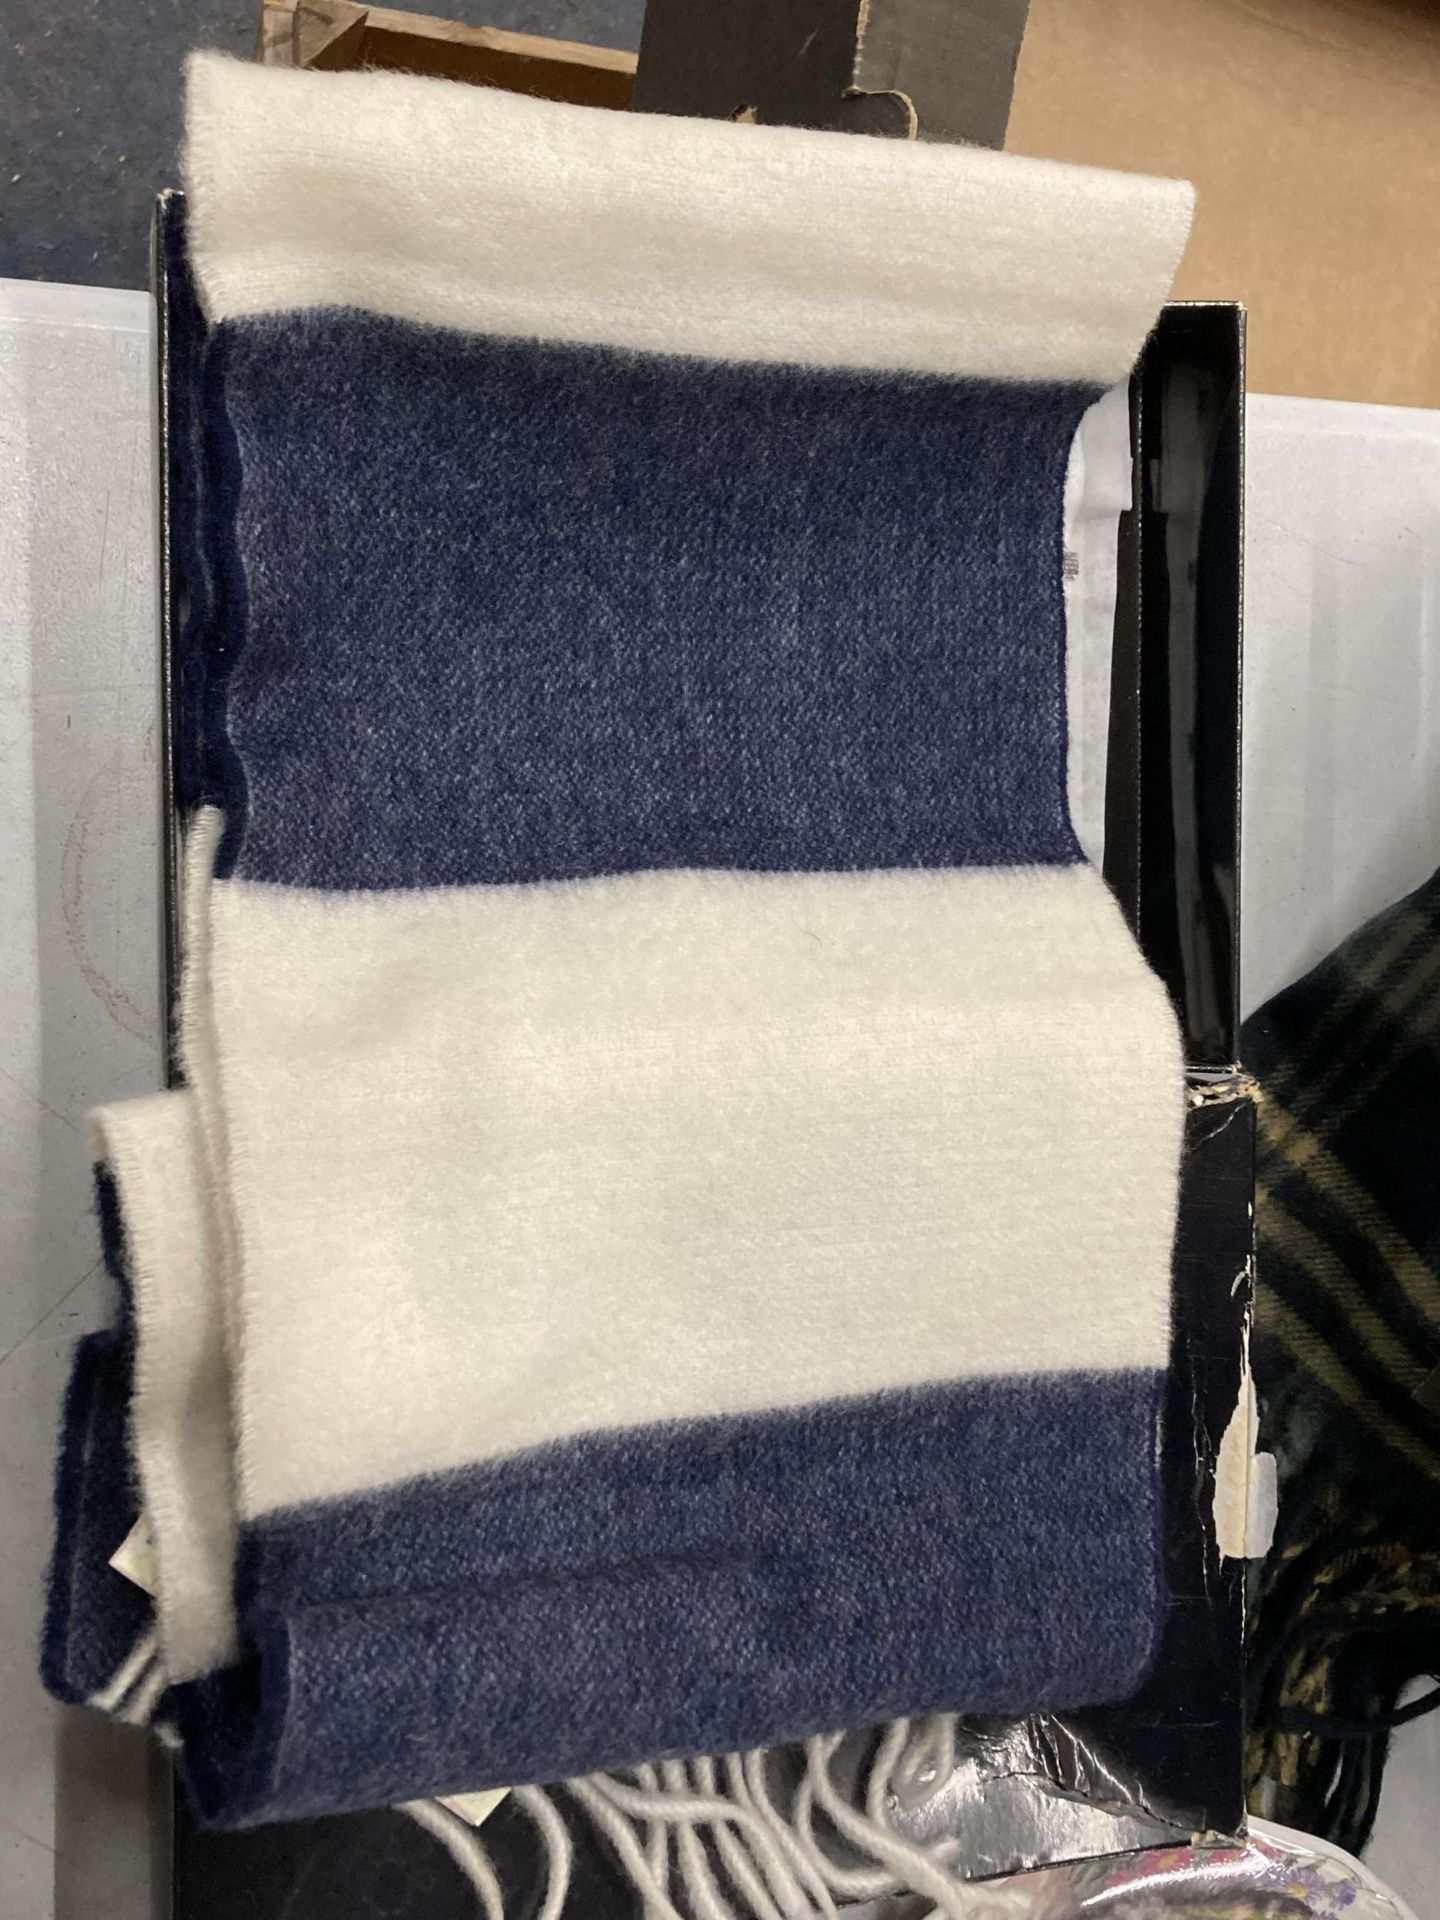 A BOXED SAVILLE ROGUE CASHMERE FOOTBALL SCARF AND FURTHER CASHMERE SCOTTISH SCARF - Image 4 of 6